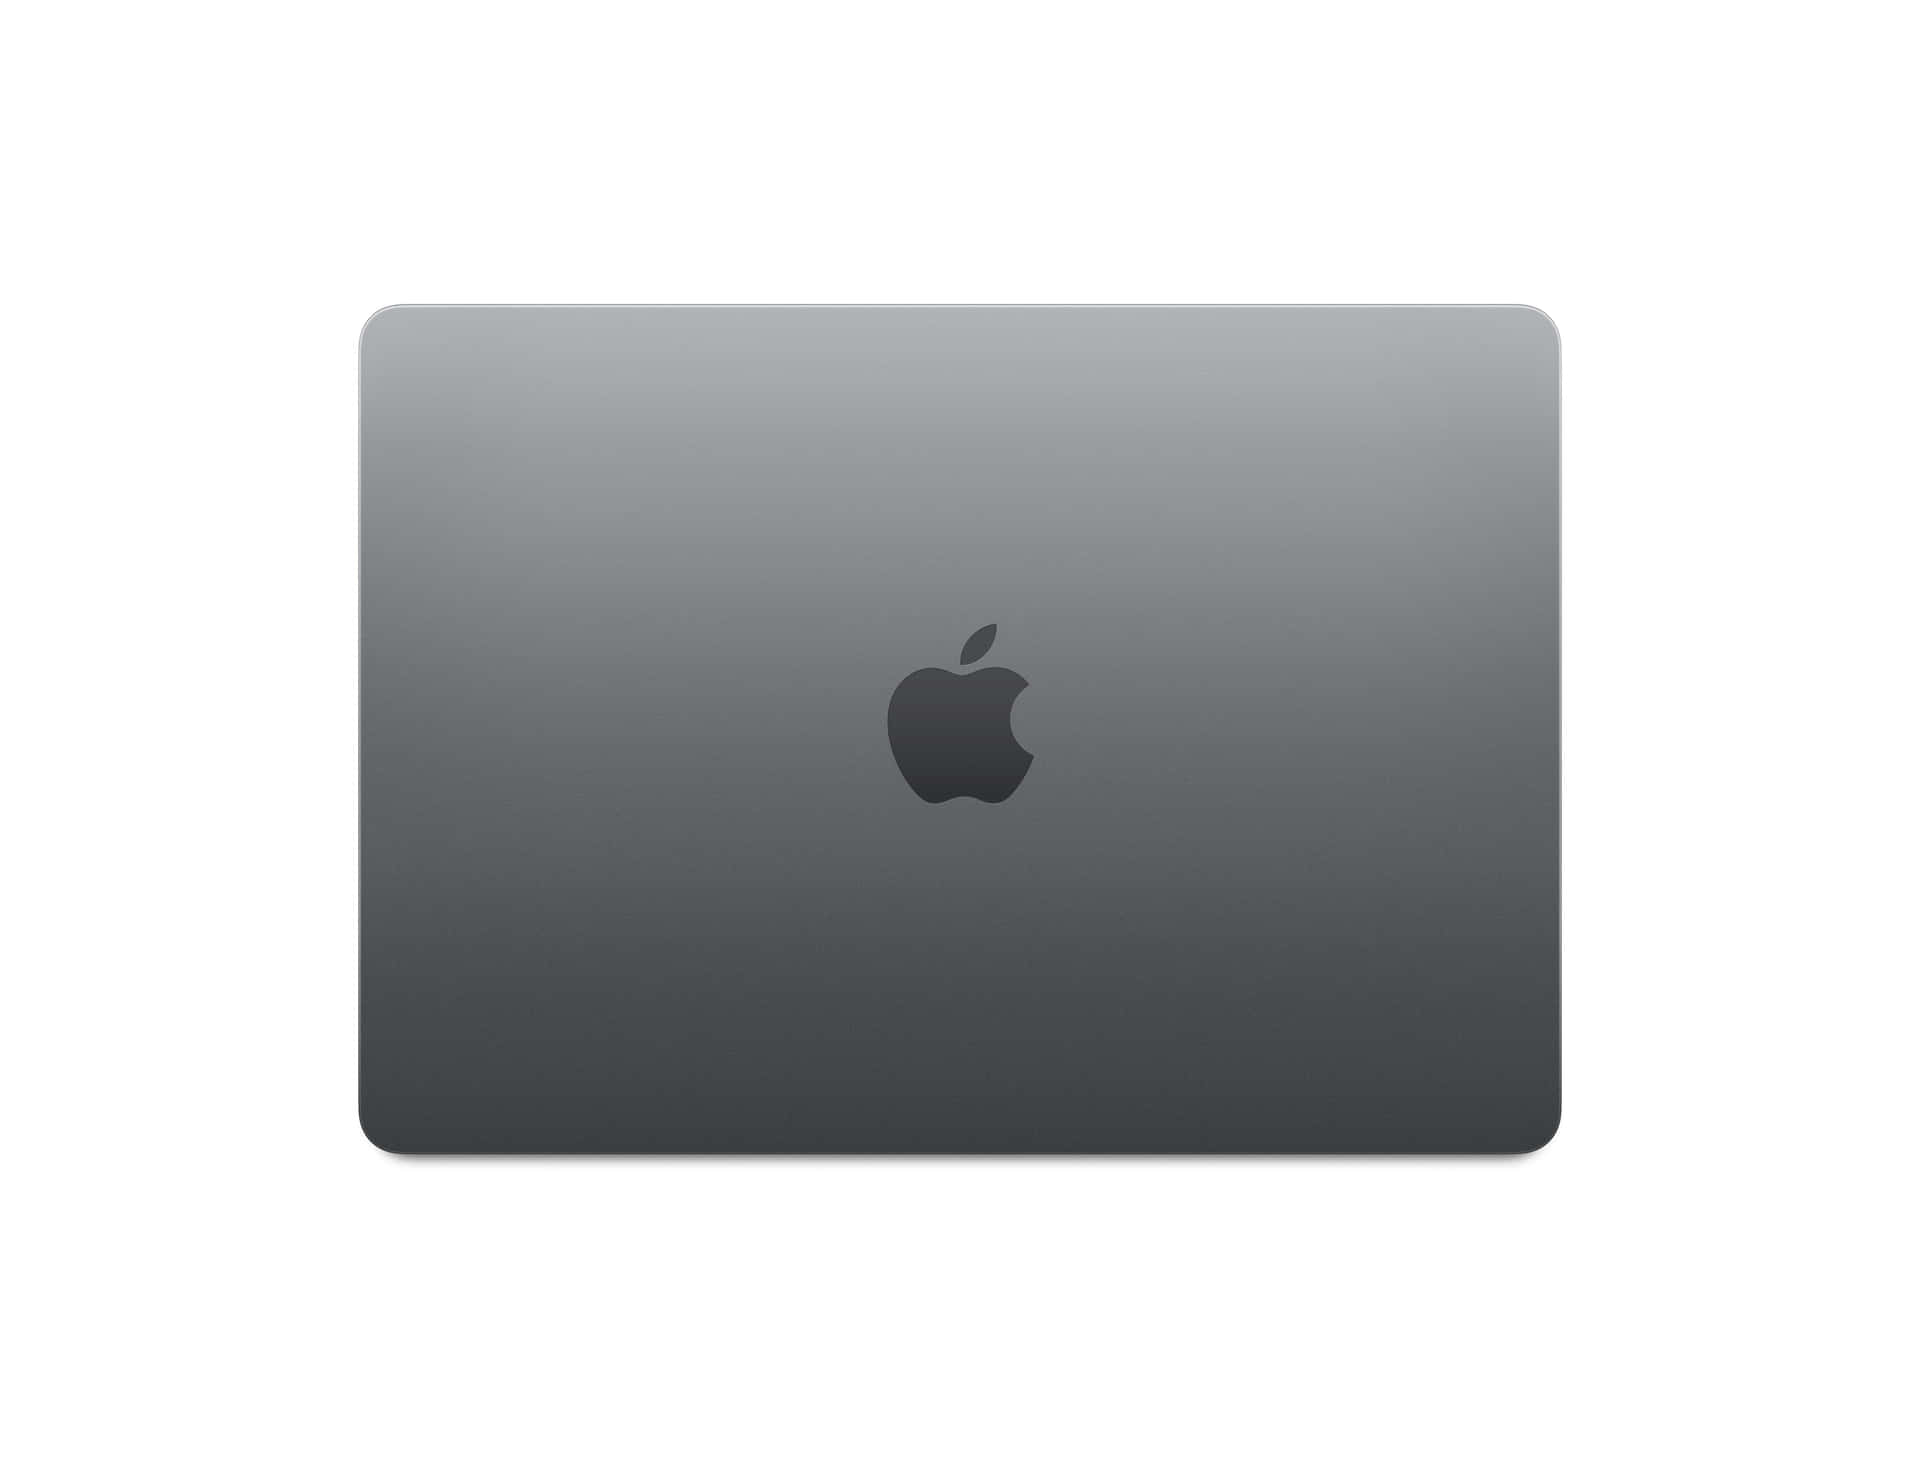 Get ready to unleash your work productivity with the sleek and stylish Black MacBook. Wallpaper